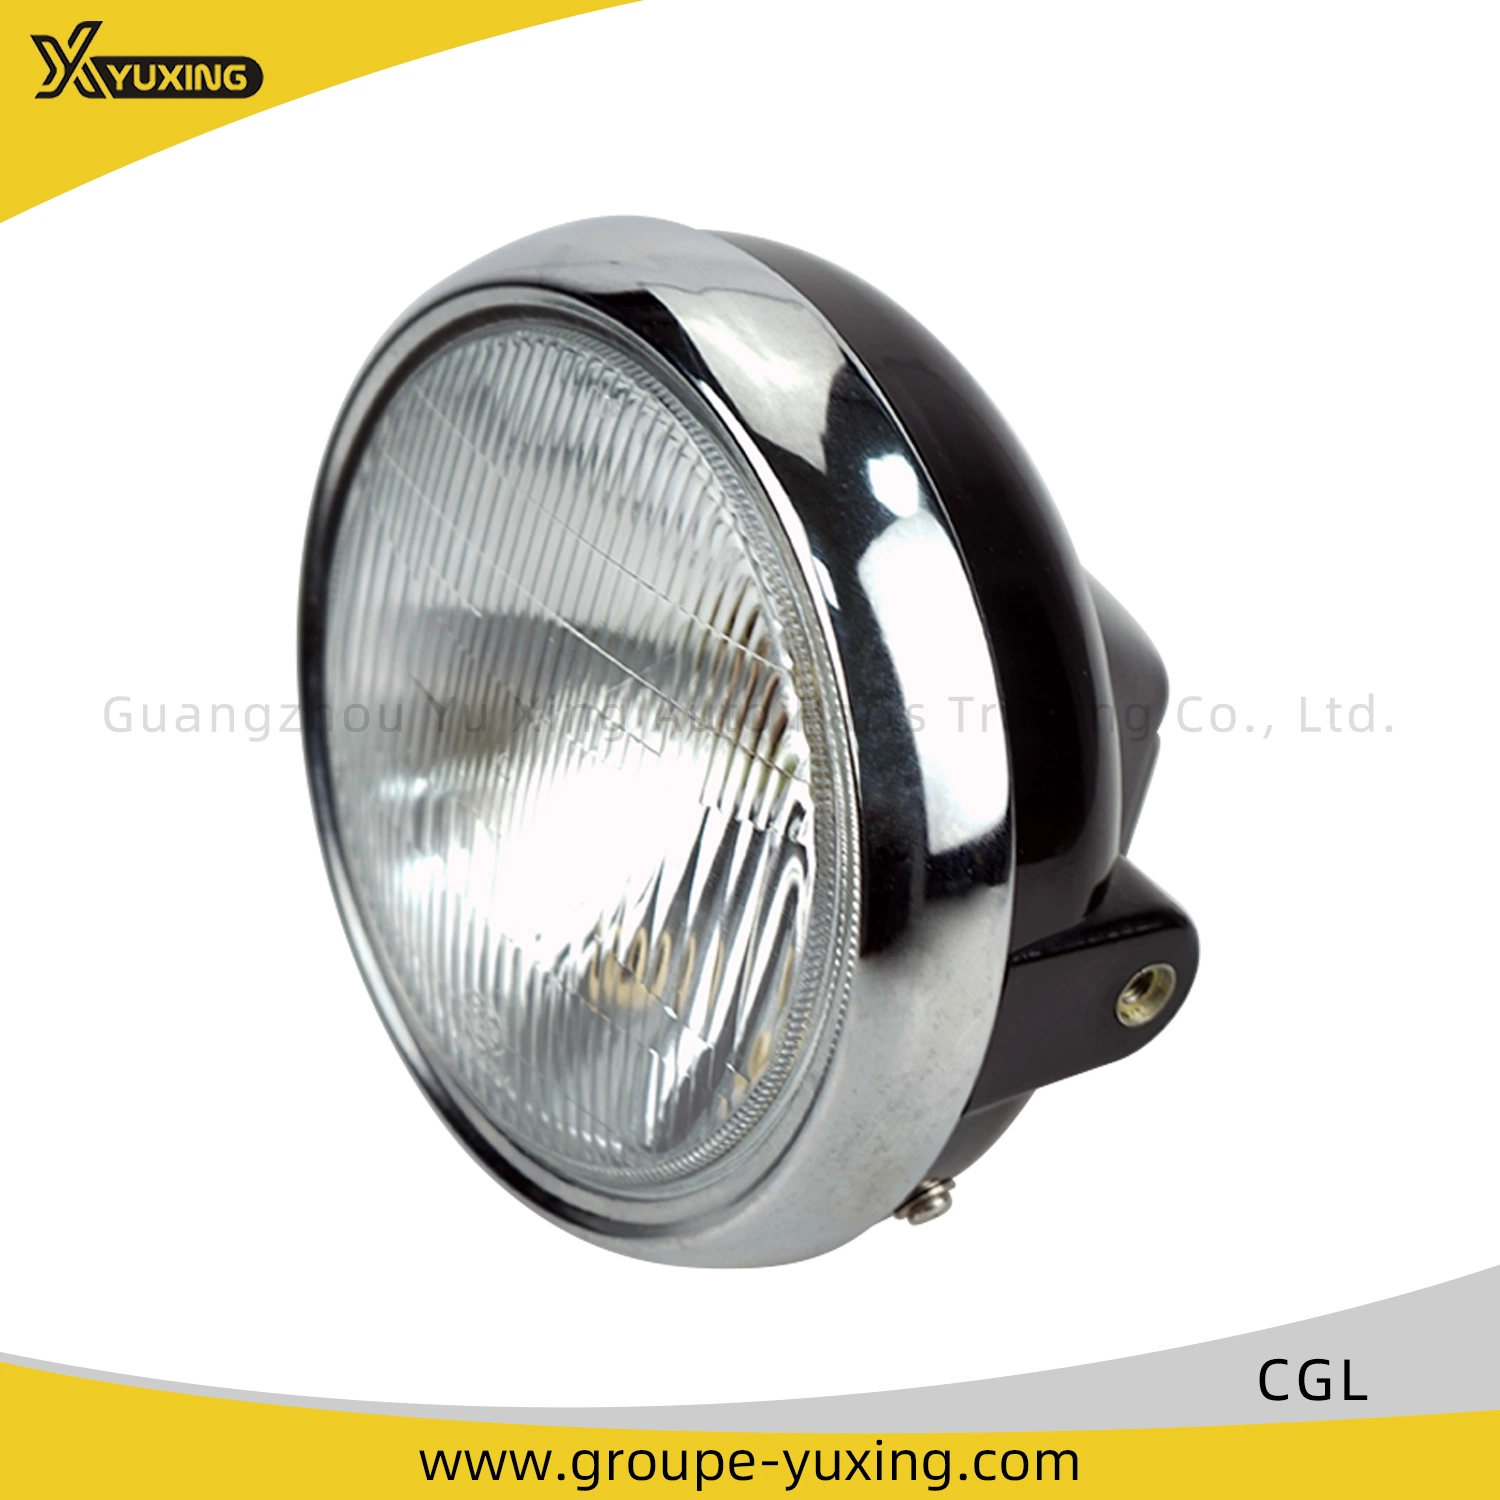 Motorcycle Spare Parts Motorcycle Head Light for Cgl